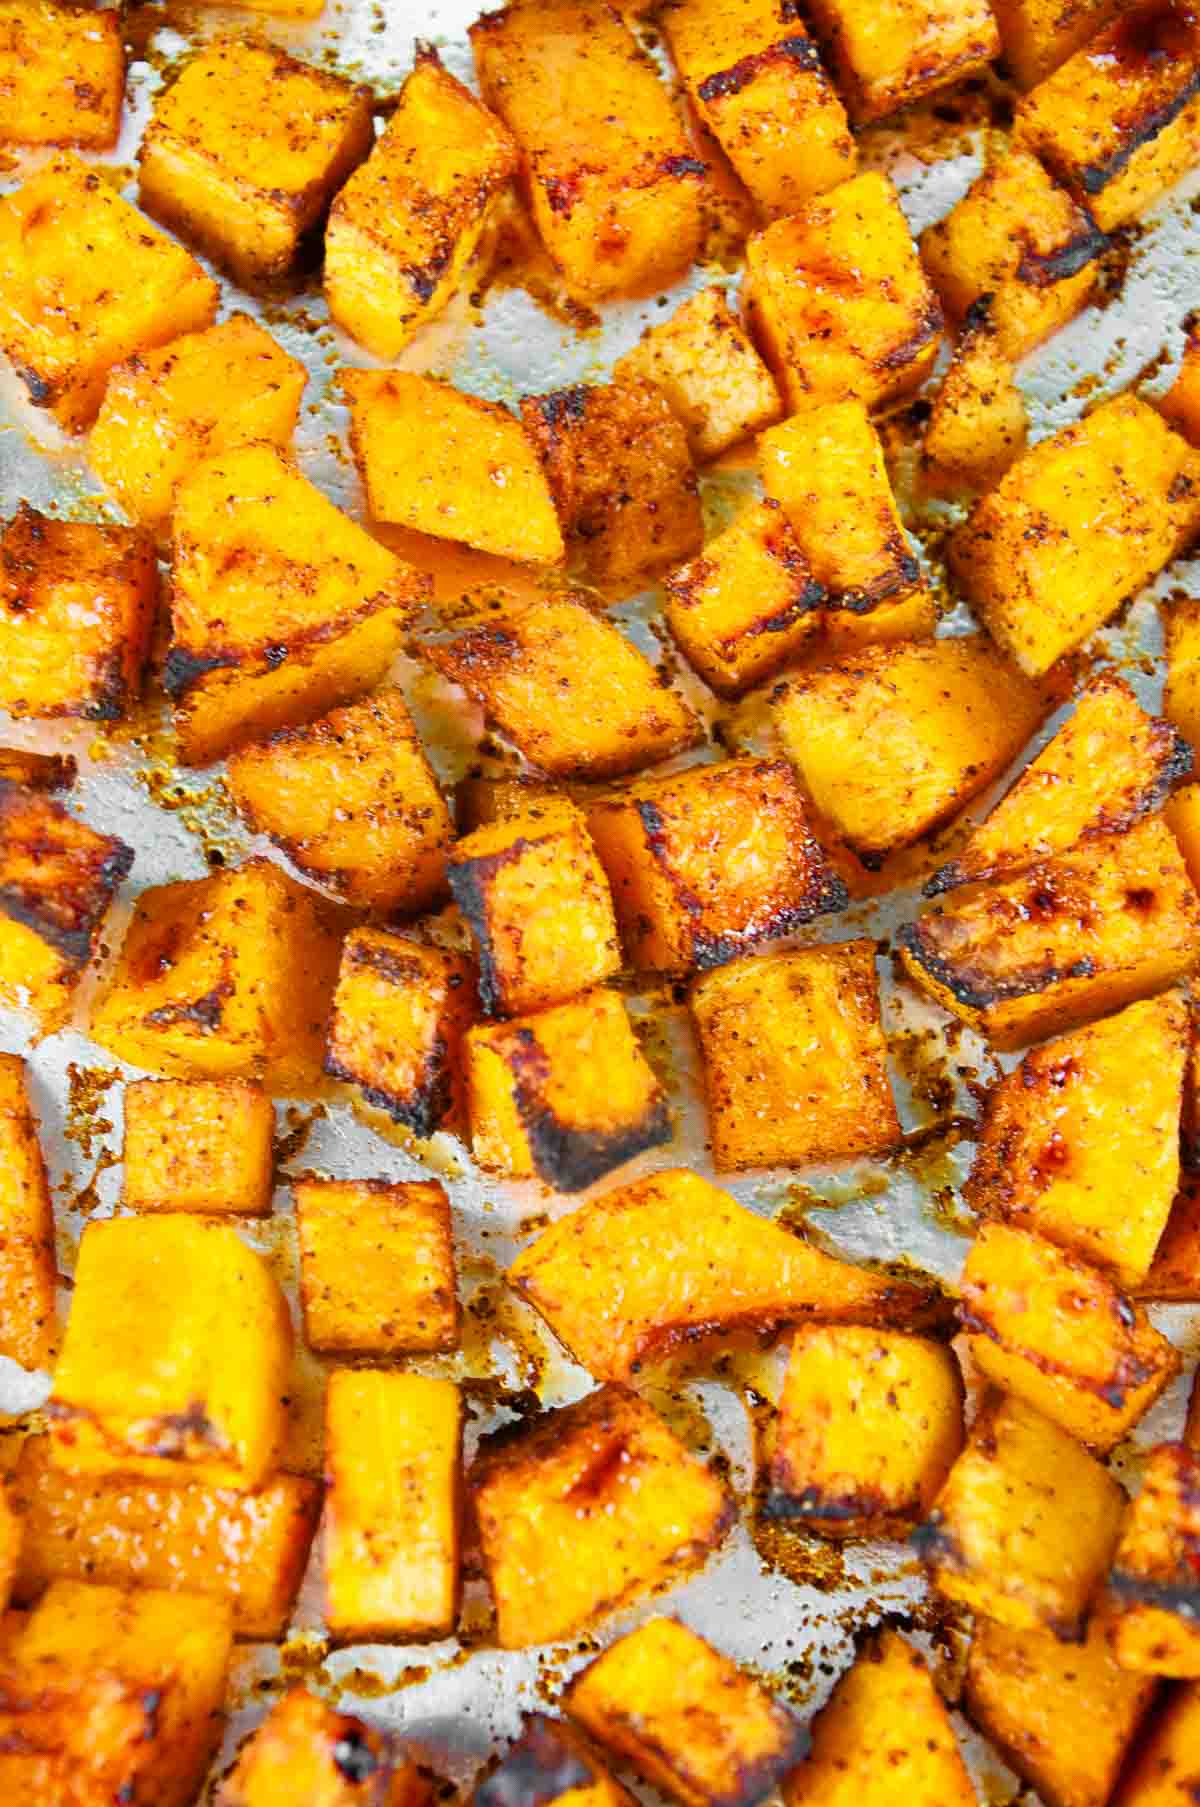 Savory Roasted Spiced Butternut Squash ready to be enjoyed!